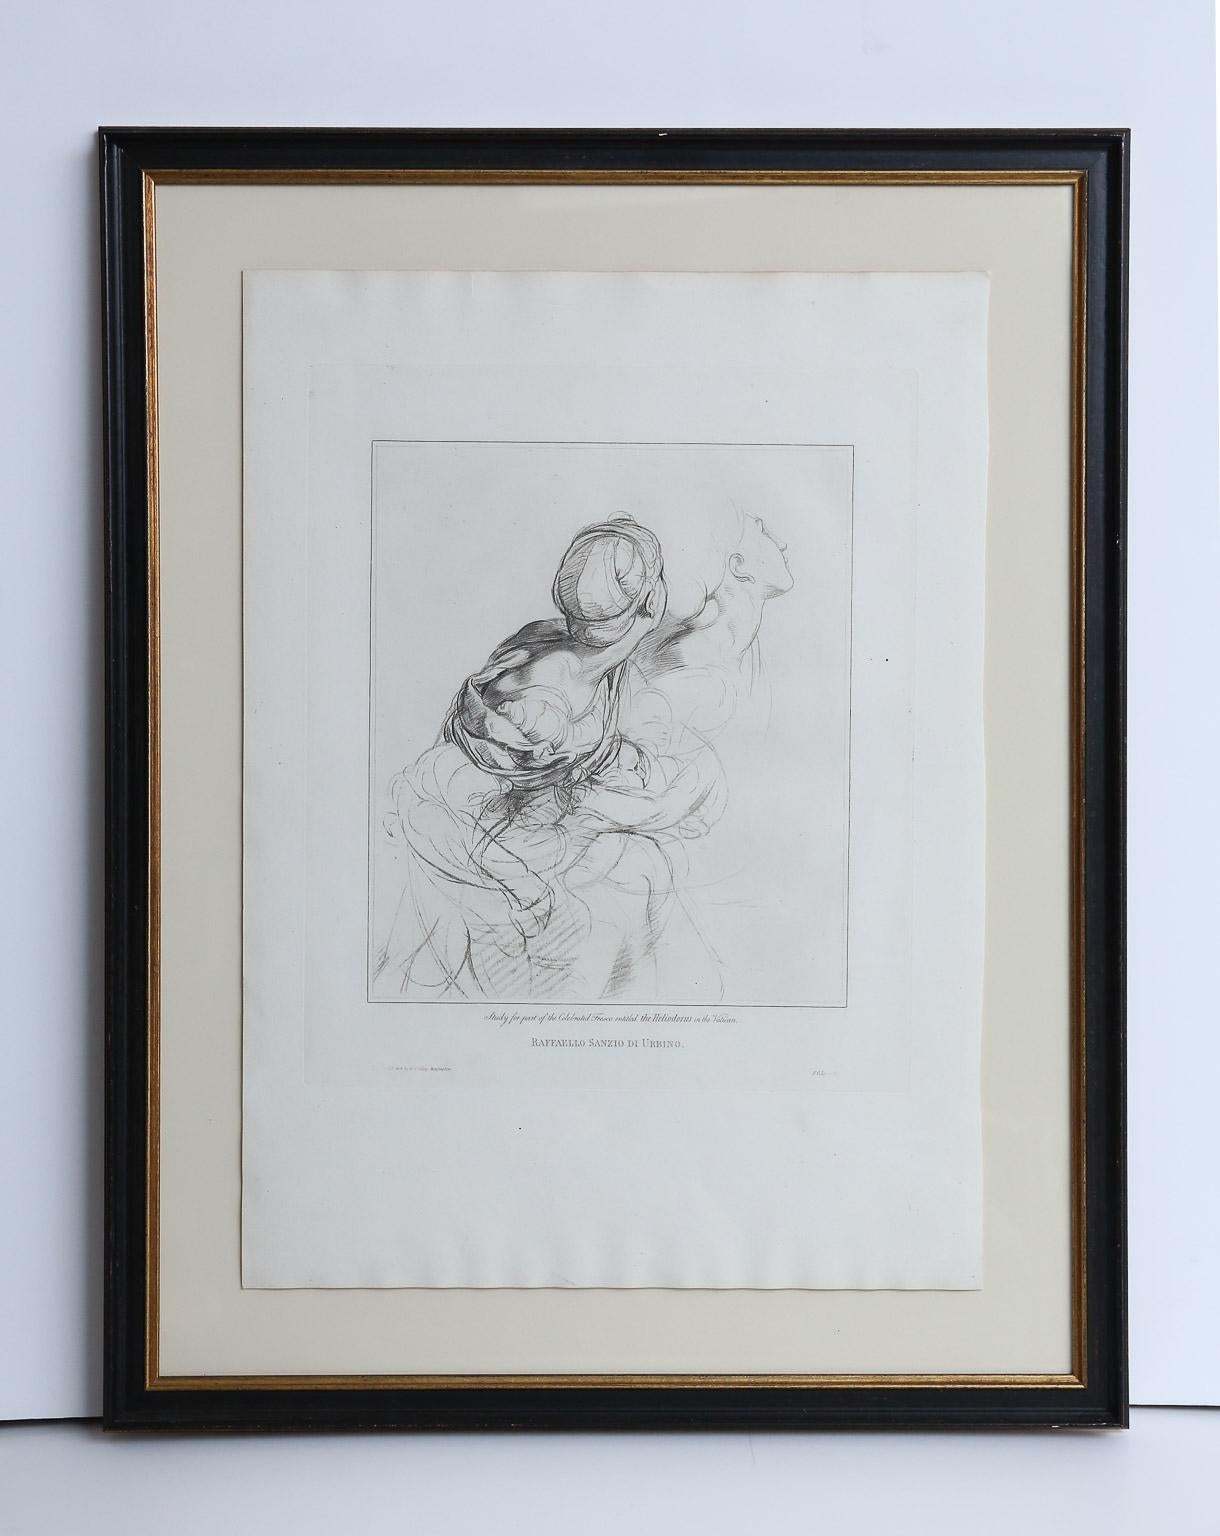 An exceptional collection of Italian engravings depicting various figures, faces and scenes of Rome. These pieces are custom framed in Classic black and gold frame. Price listed is per framed engraving.